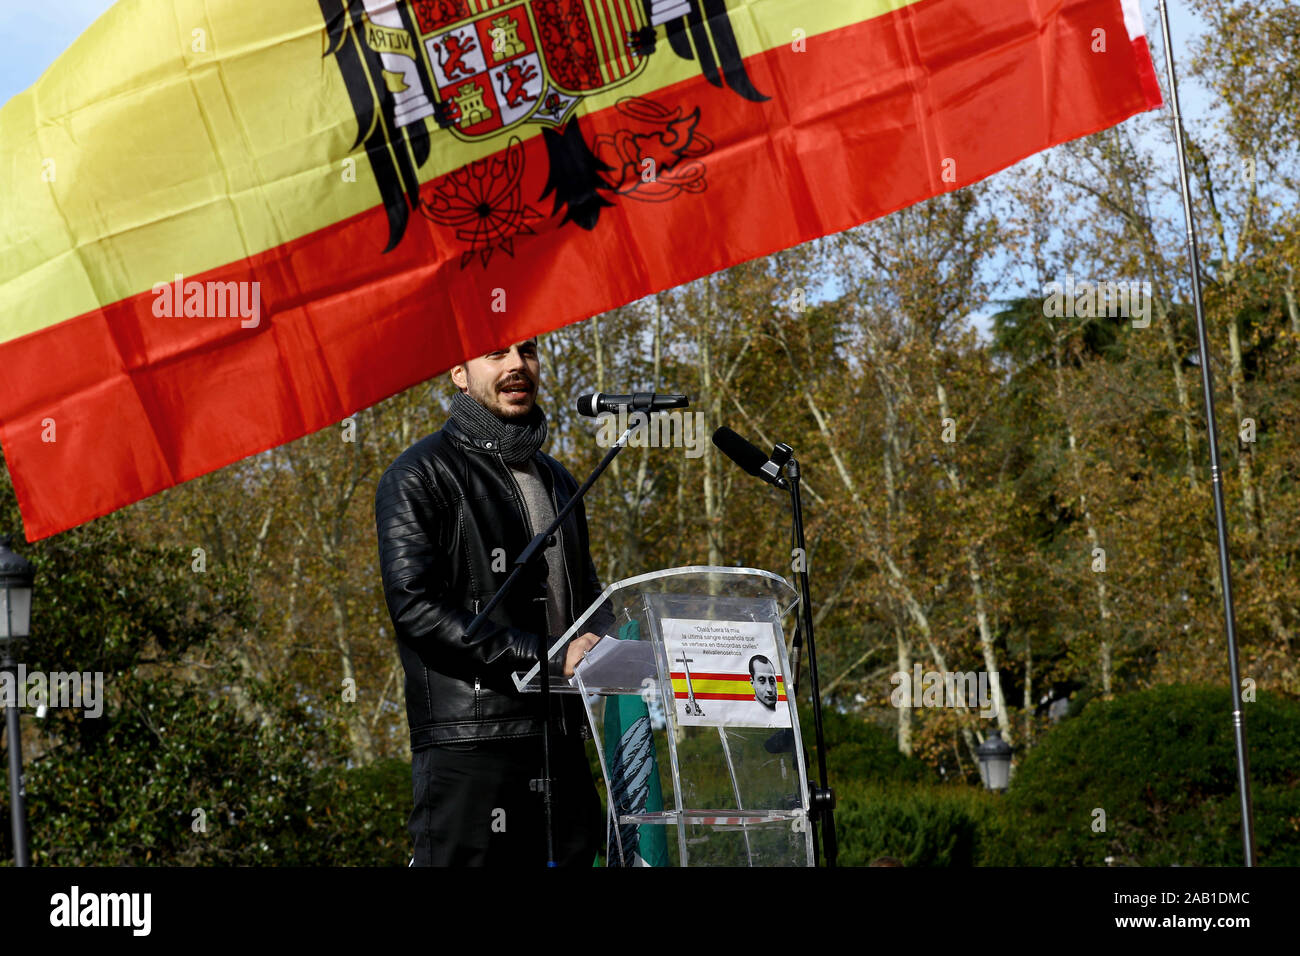 Madrid, Spain; 24/11/2019.- Far-right groups La Falange and Alternativa Española (AES) in Madrid march to commemorate the dictatorship of Francisco Franco and the 38th anniversary of the dictator's death. Also the 77th anniversary of the death of the dictator and leader of La Falange, José Antonio Primo de Rivera and to protest against the exhumation of the dictator. At the event six women members of Femen protestedPhoto: Juan Carlos Rojas/Picture Alliance | usage worldwide Stock Photo